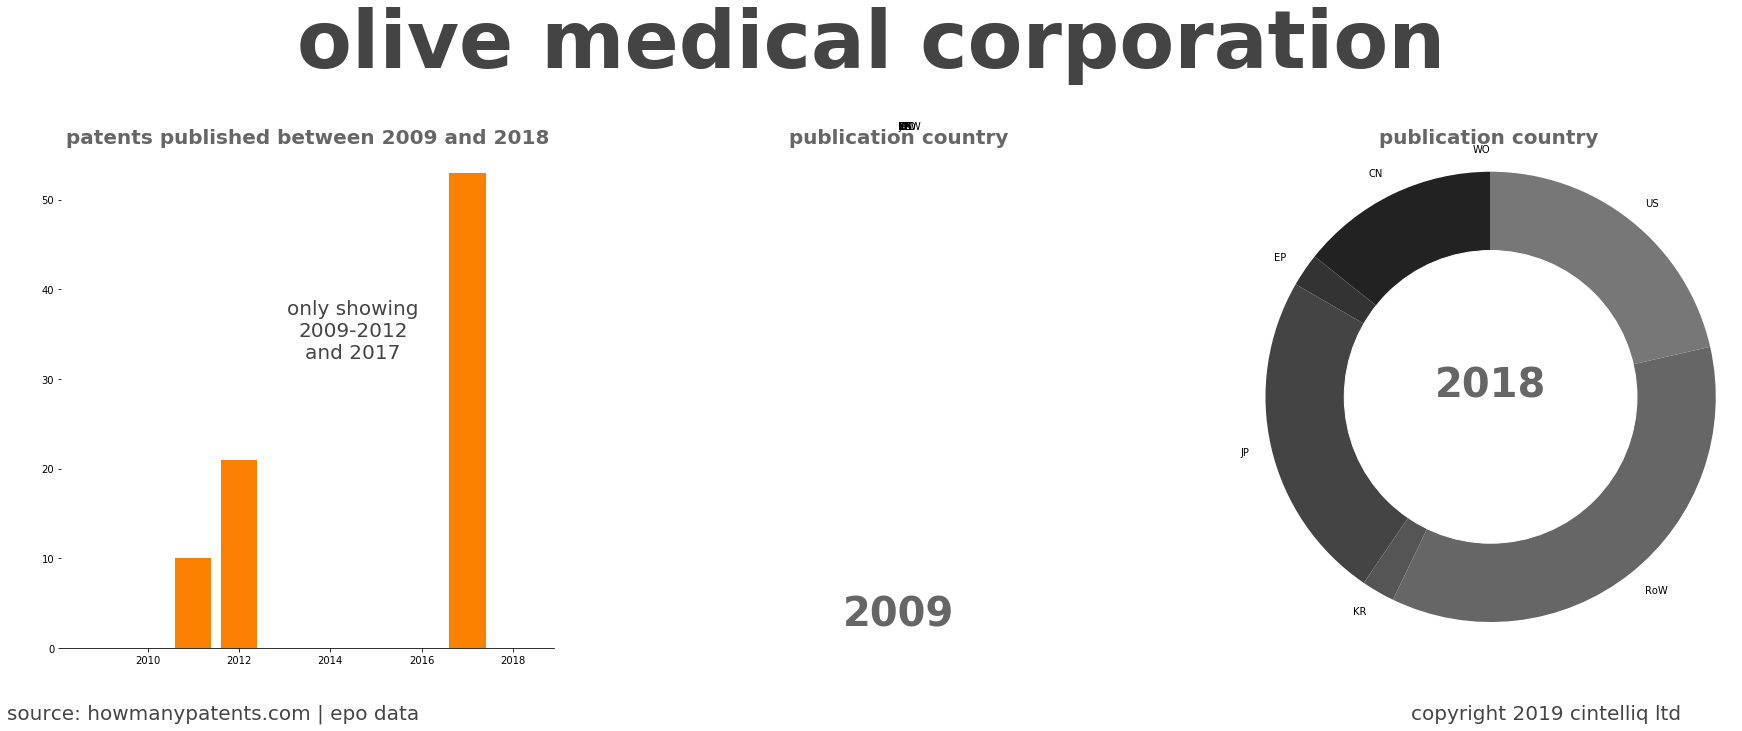 summary of patents for Olive Medical Corporation